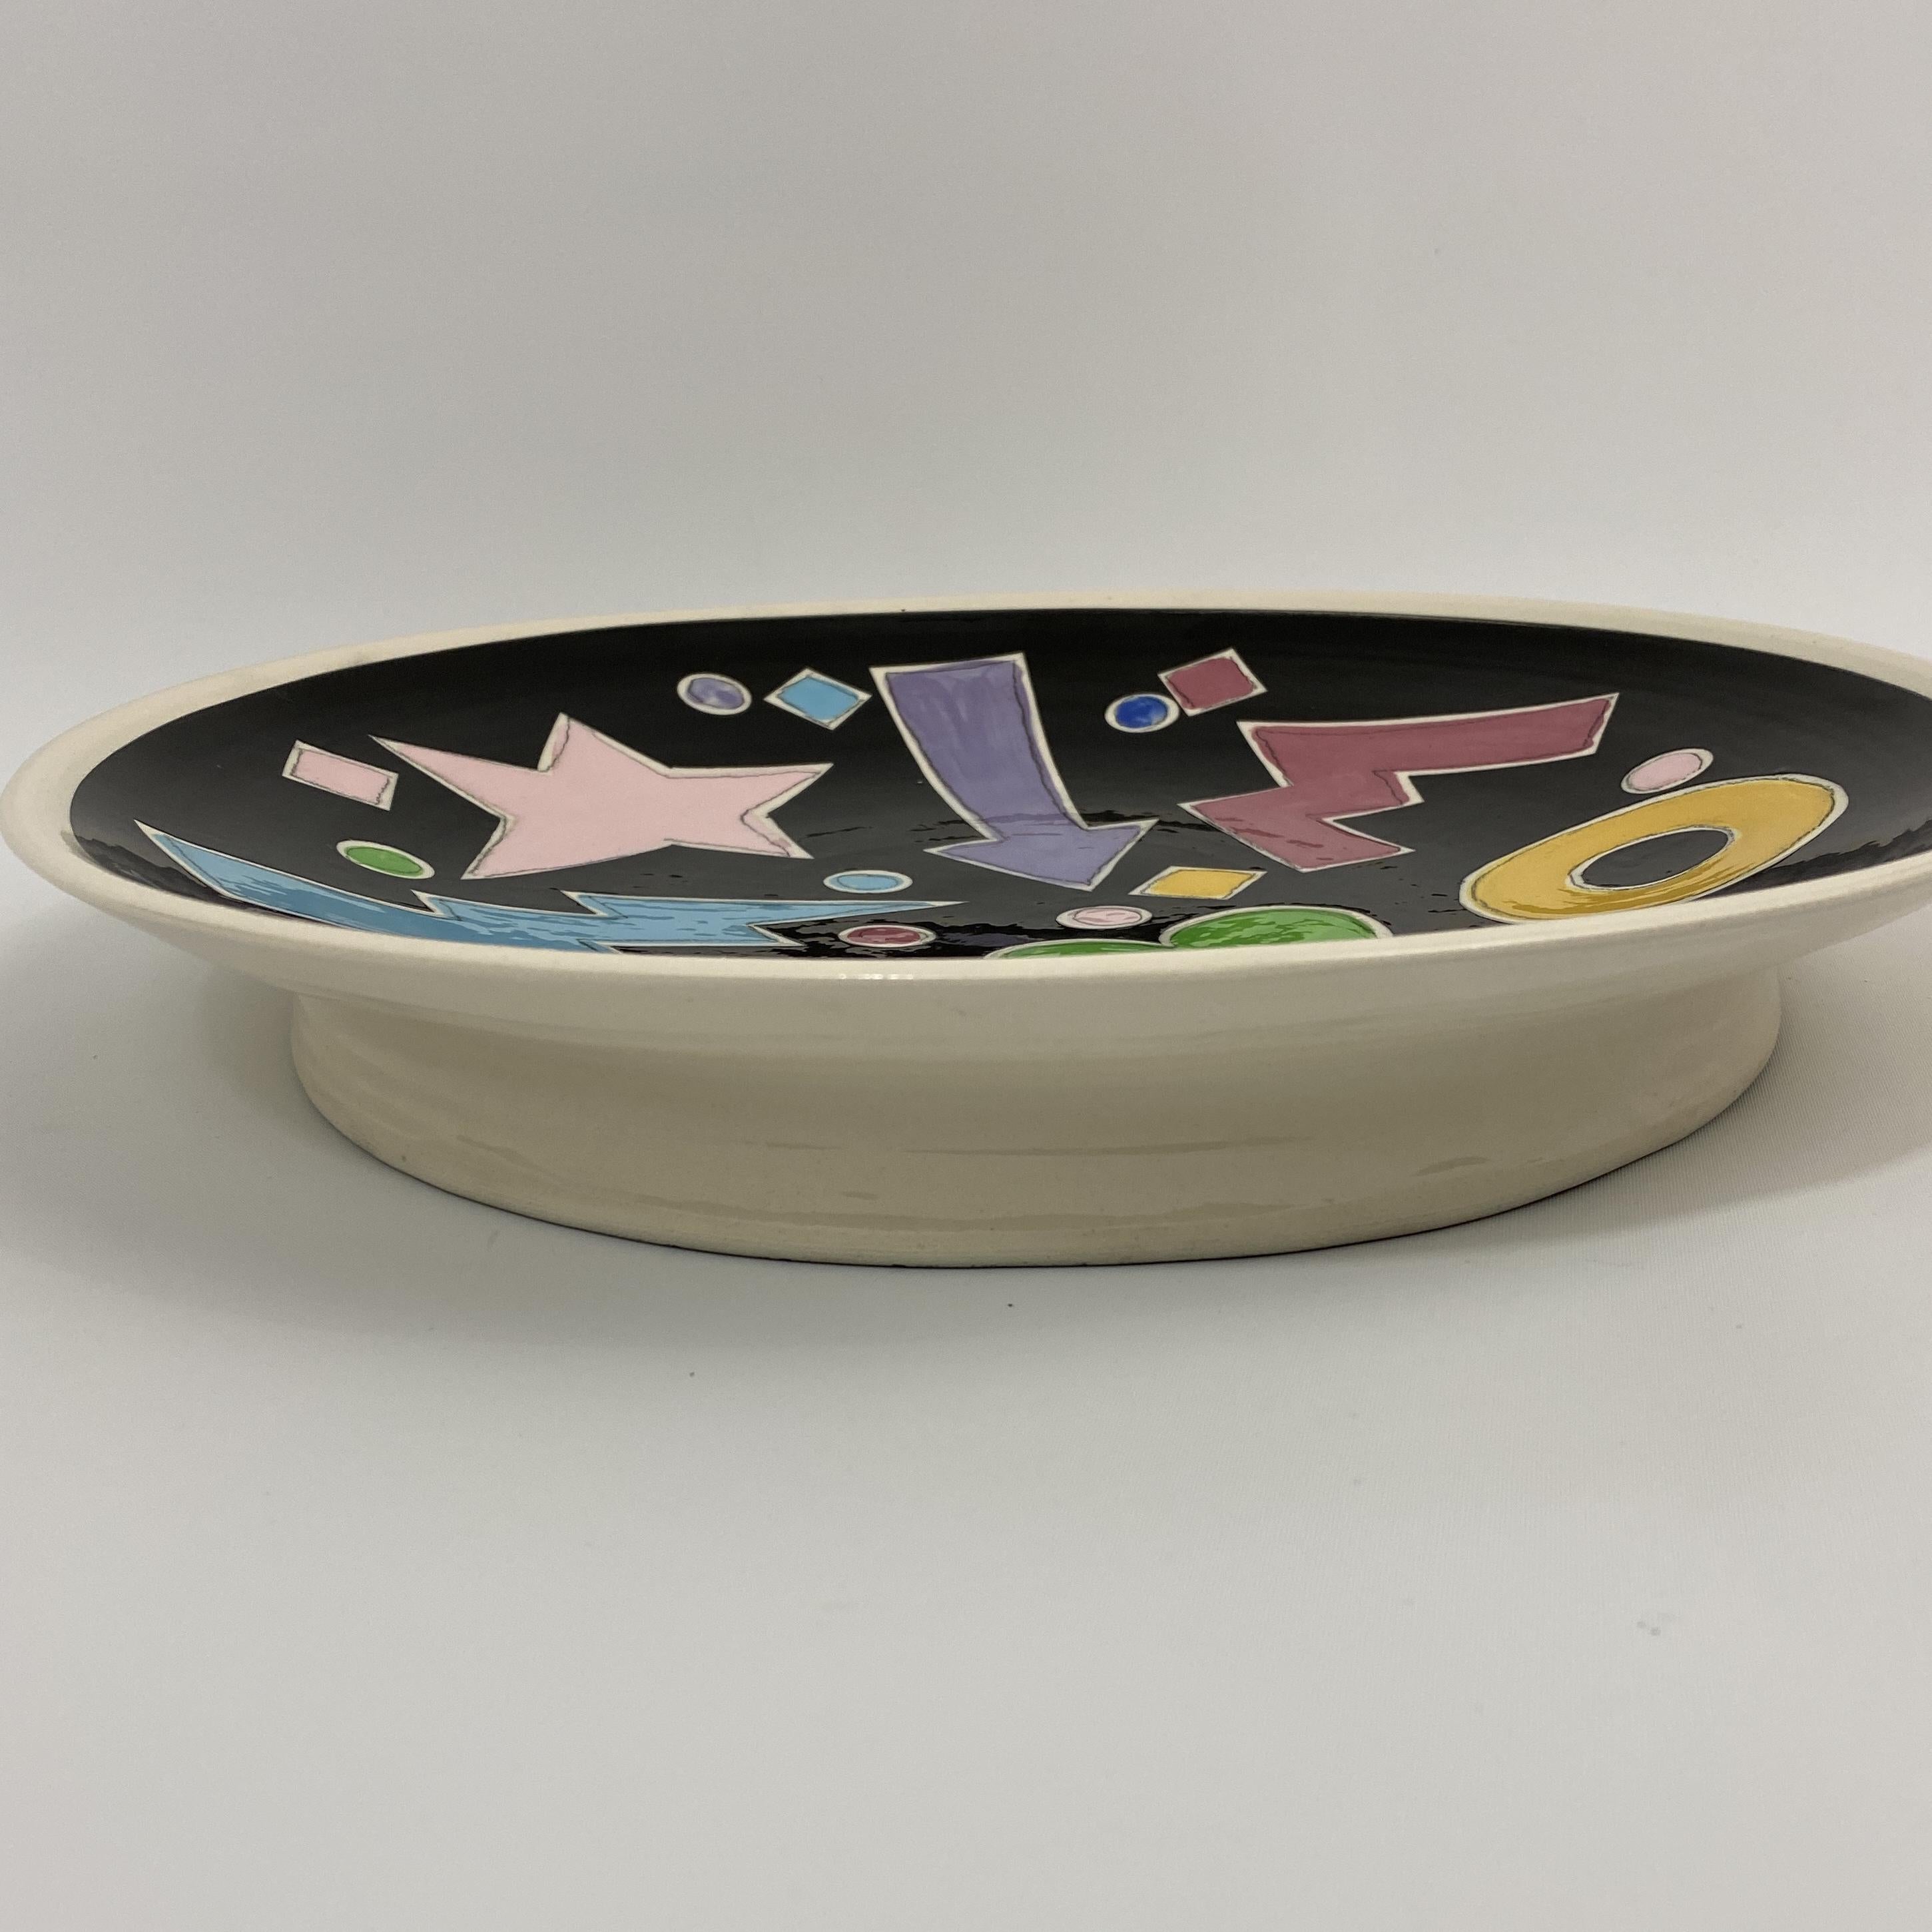 1988 Ted Saito Signed Artist Studio Pottery Pop Art Dish In Good Condition For Sale In Westfield, NJ